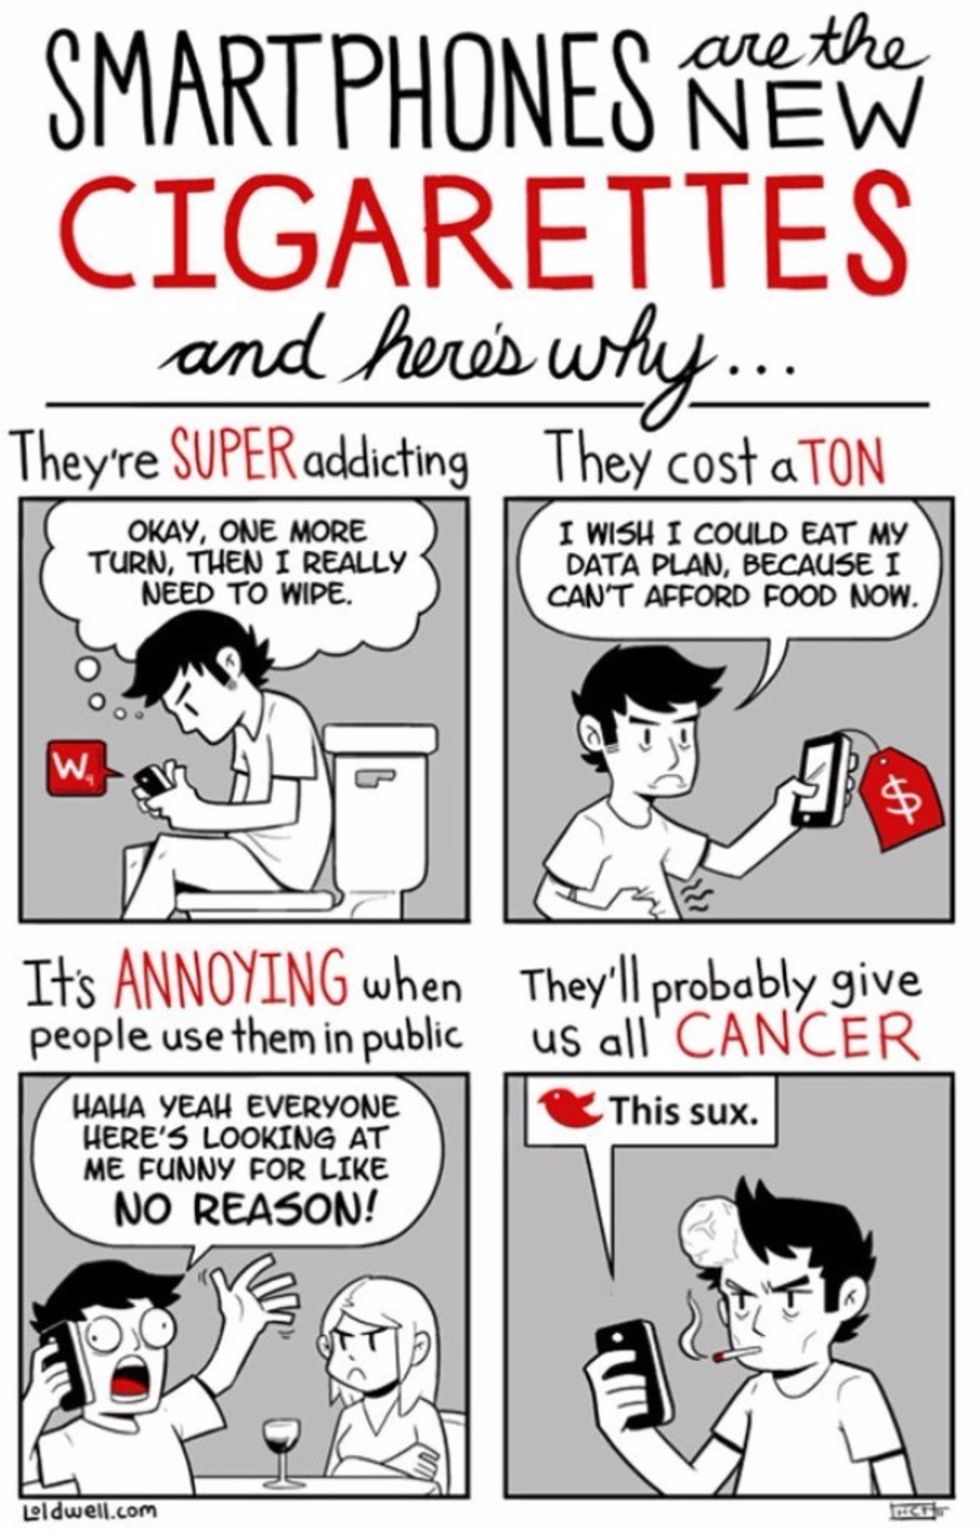 40 Hilarious Cartoons That Perfectly Capture Your Smartphone Addiction 22 Words